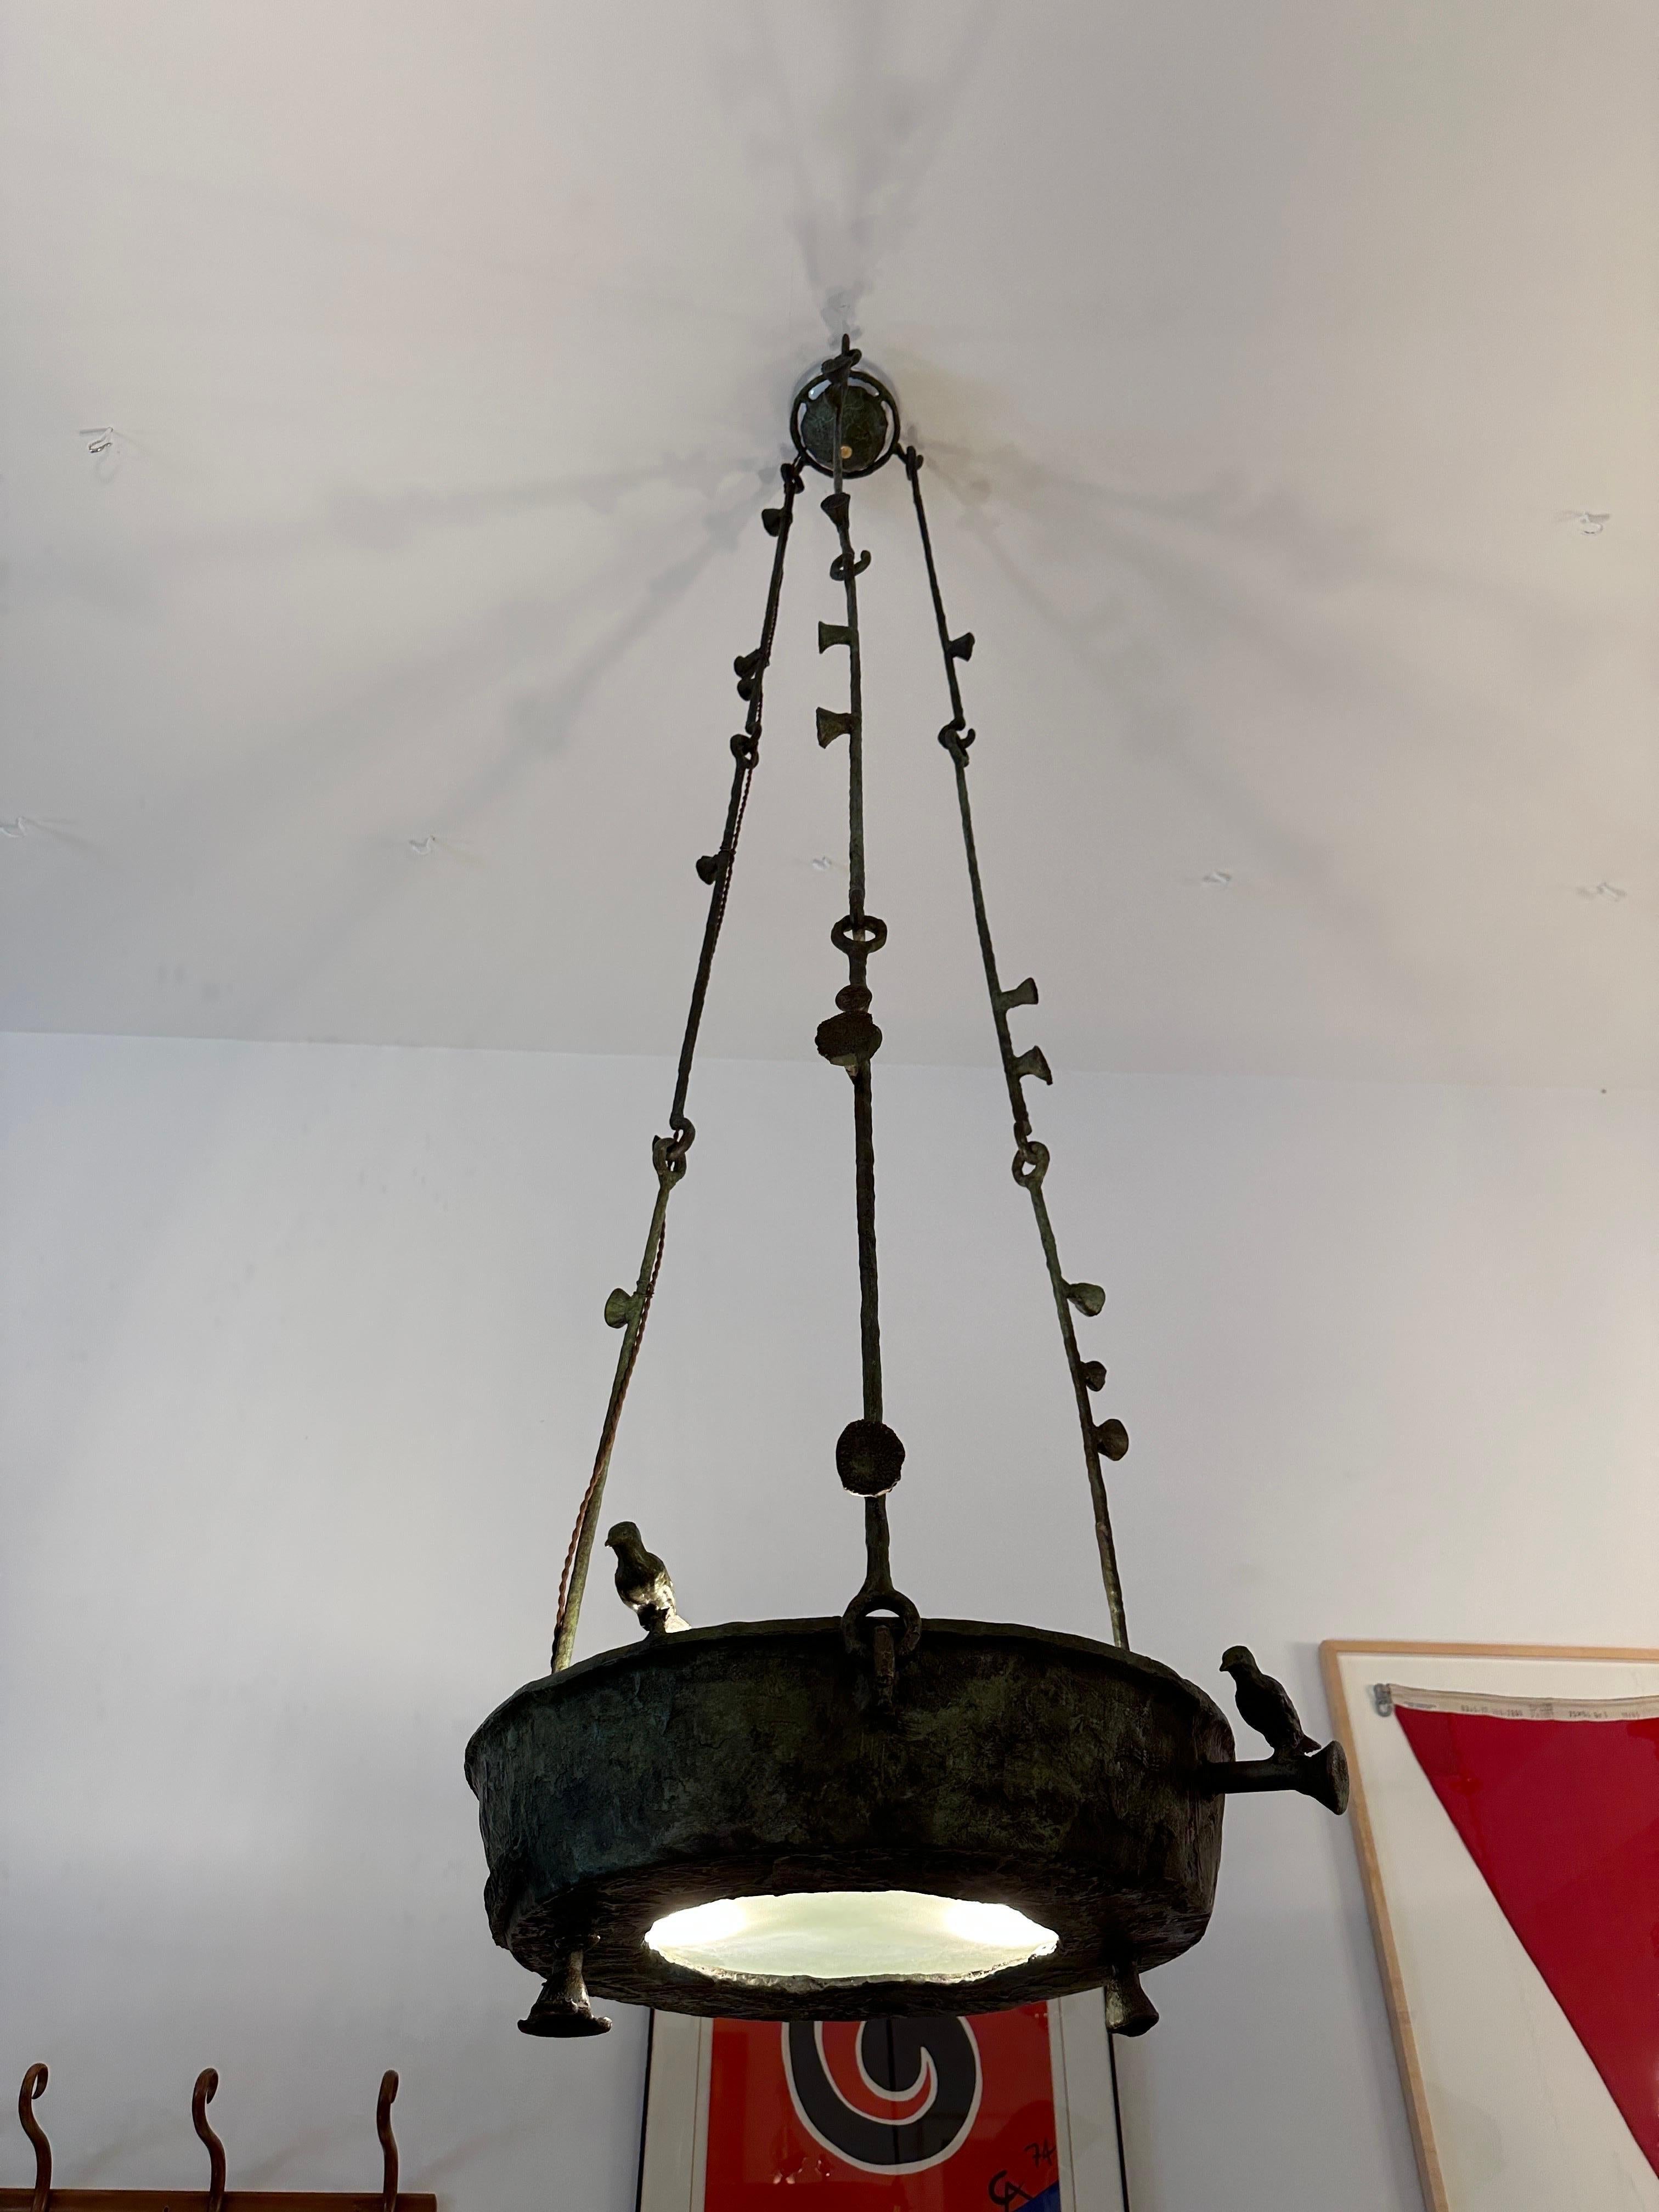 Outstanding verdigris bronze bird bath chandelier by famed Israeli designer, Ilana Goor B. 1936). A monumental three level light fixture, whereas the arms connect and can be shortened for whatever design space you have. This is signed on bronze